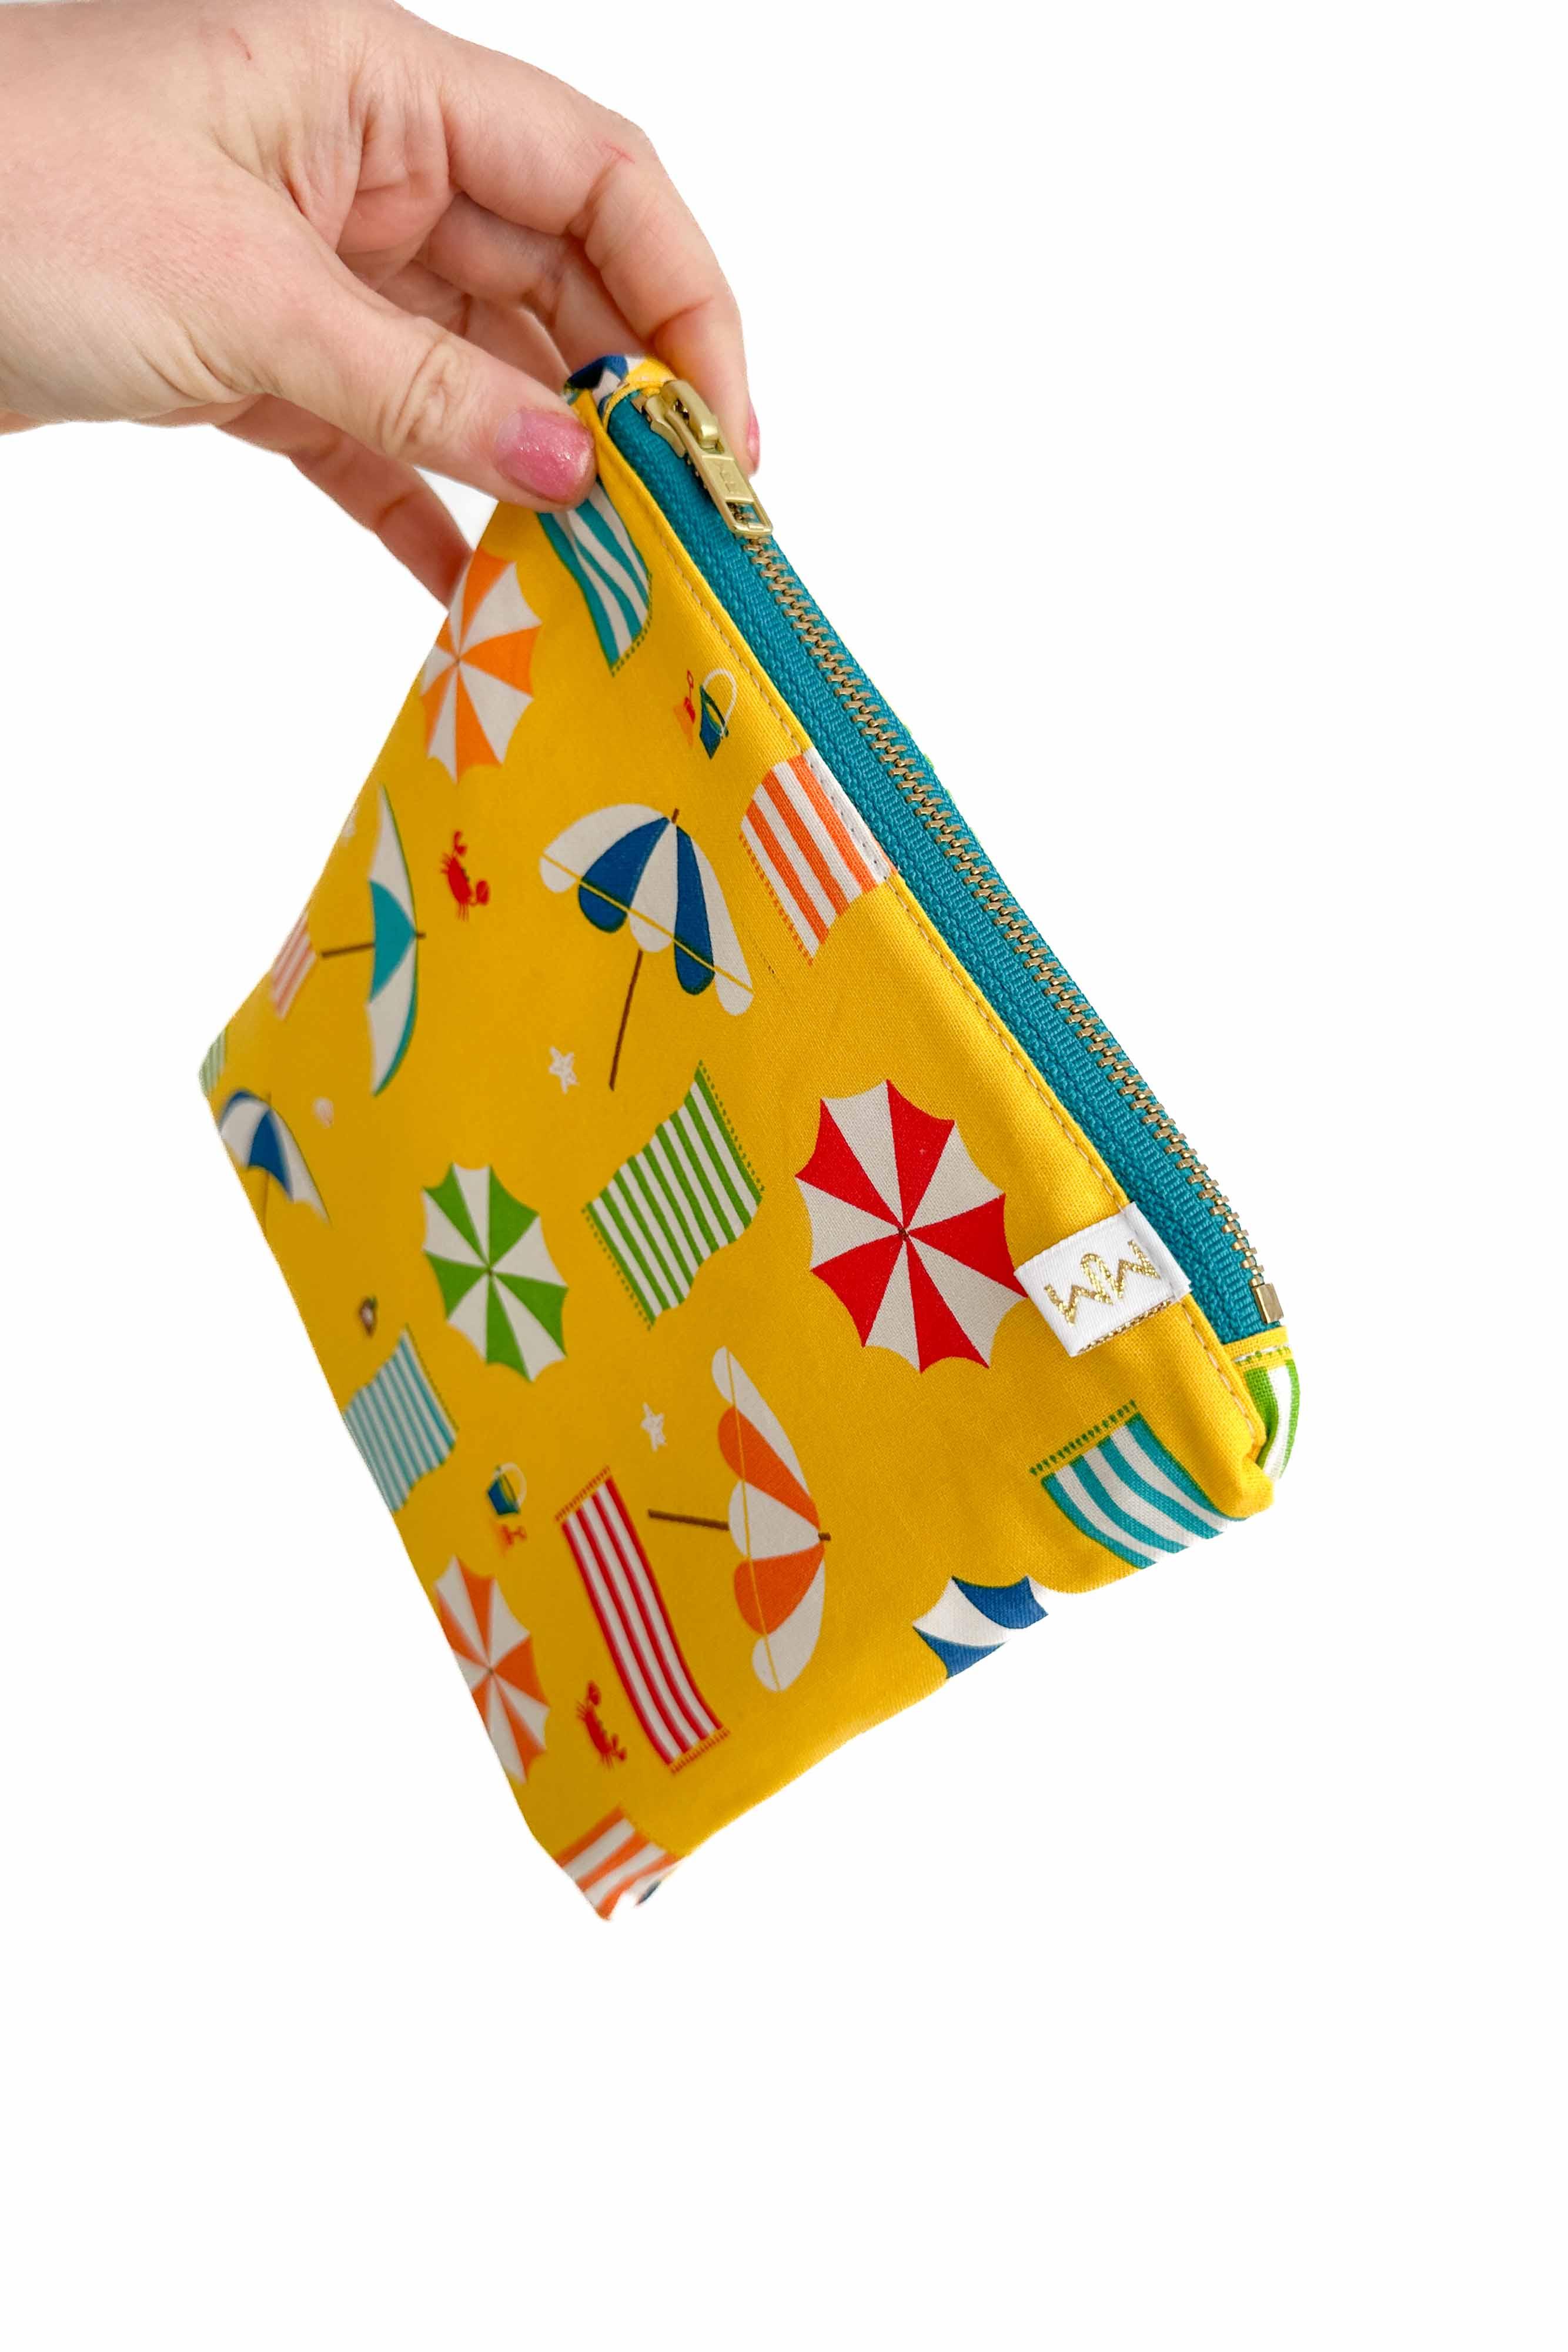 At The Beach Small Wet Bag READY TO SHIP - Modern Makerie